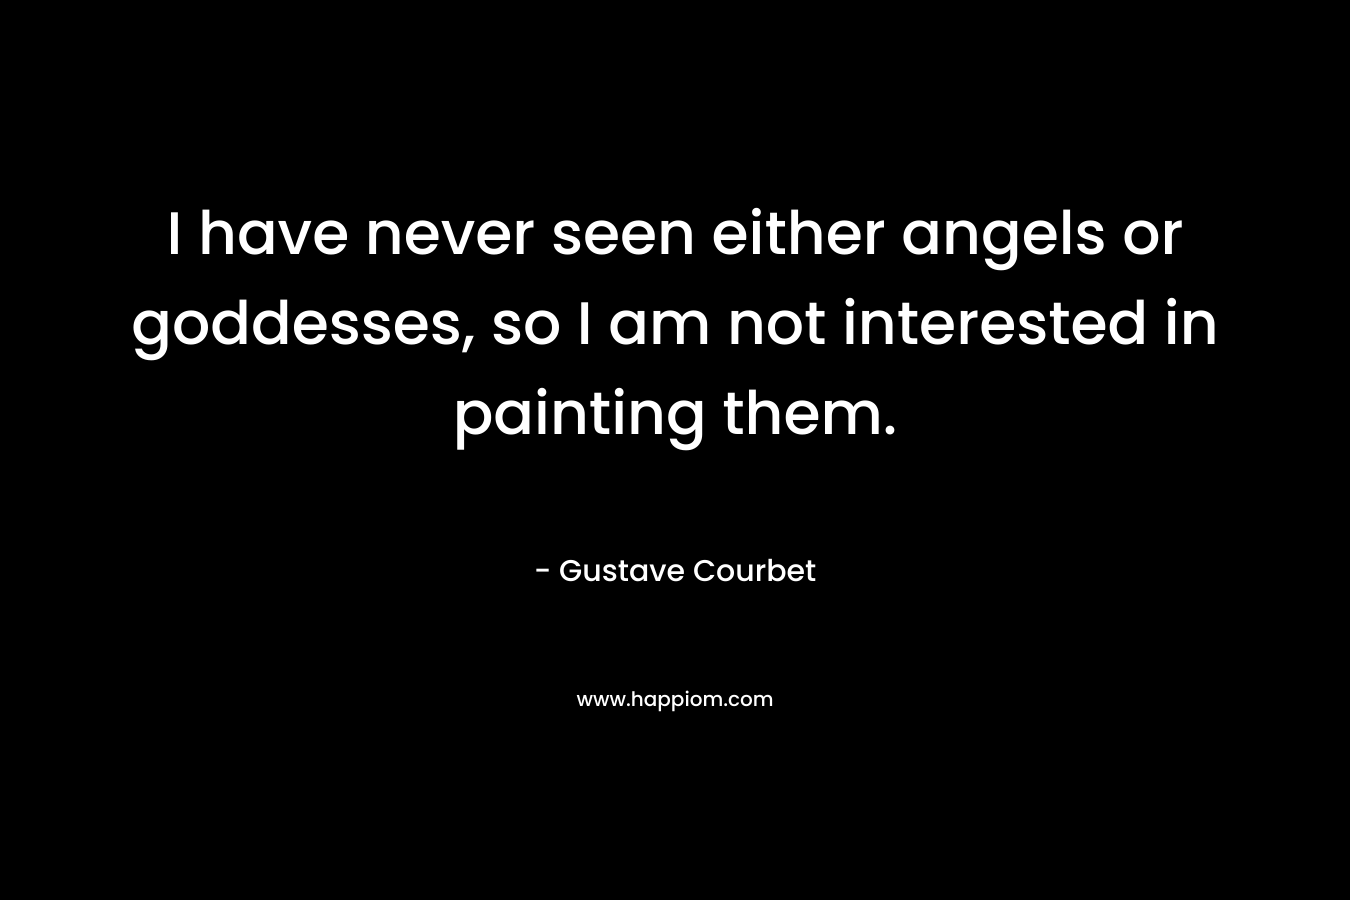 I have never seen either angels or goddesses, so I am not interested in painting them. – Gustave Courbet